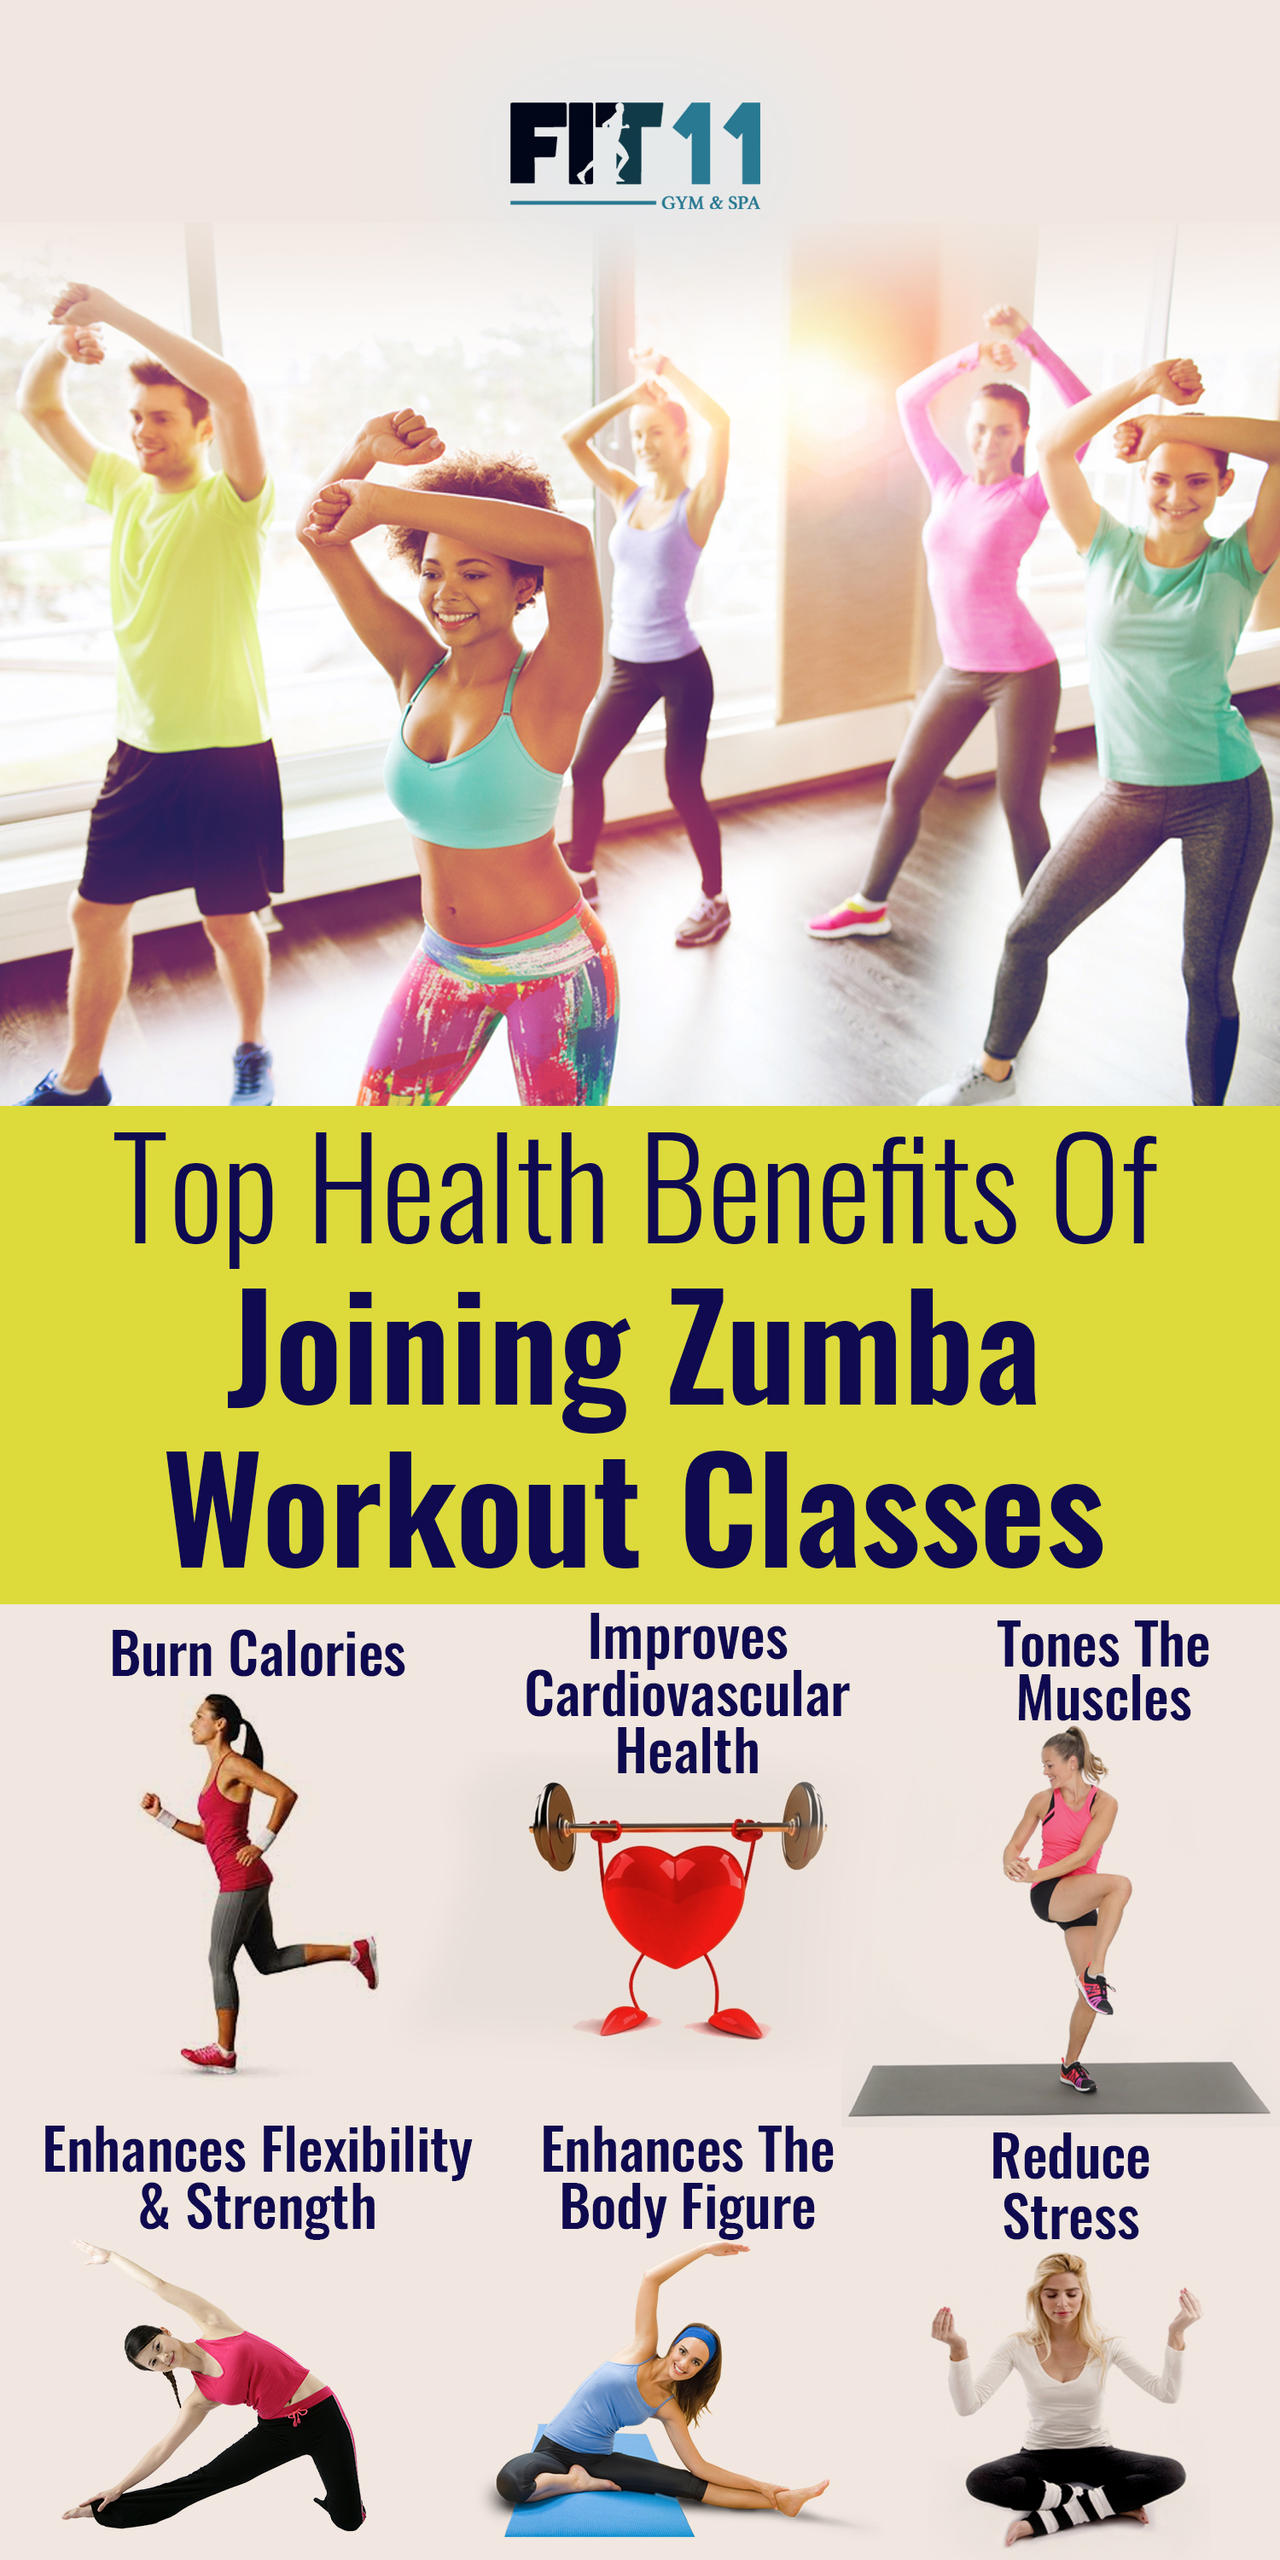 I. Introduction to Zumba Workouts and Cardiovascular Health